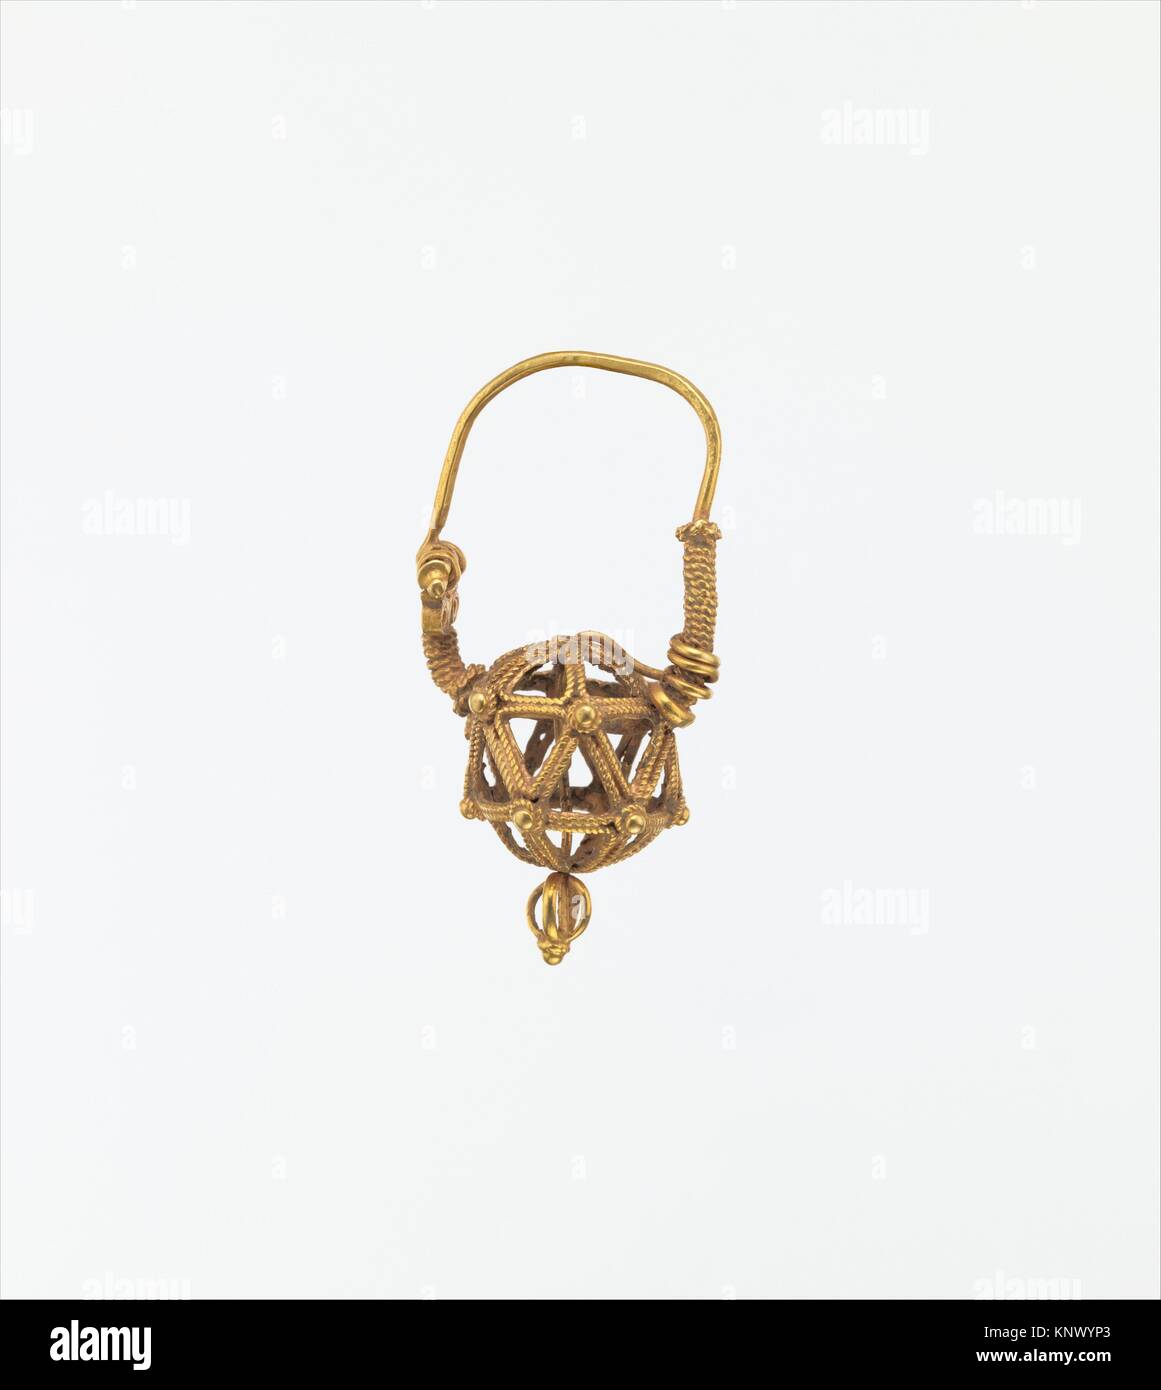 Earring. Date: first half 11th century; Geography: Attributed to Iran; Medium: Gold; filigree and granulation; Dimensions: H. 3.2cm; Classification: Stock Photo